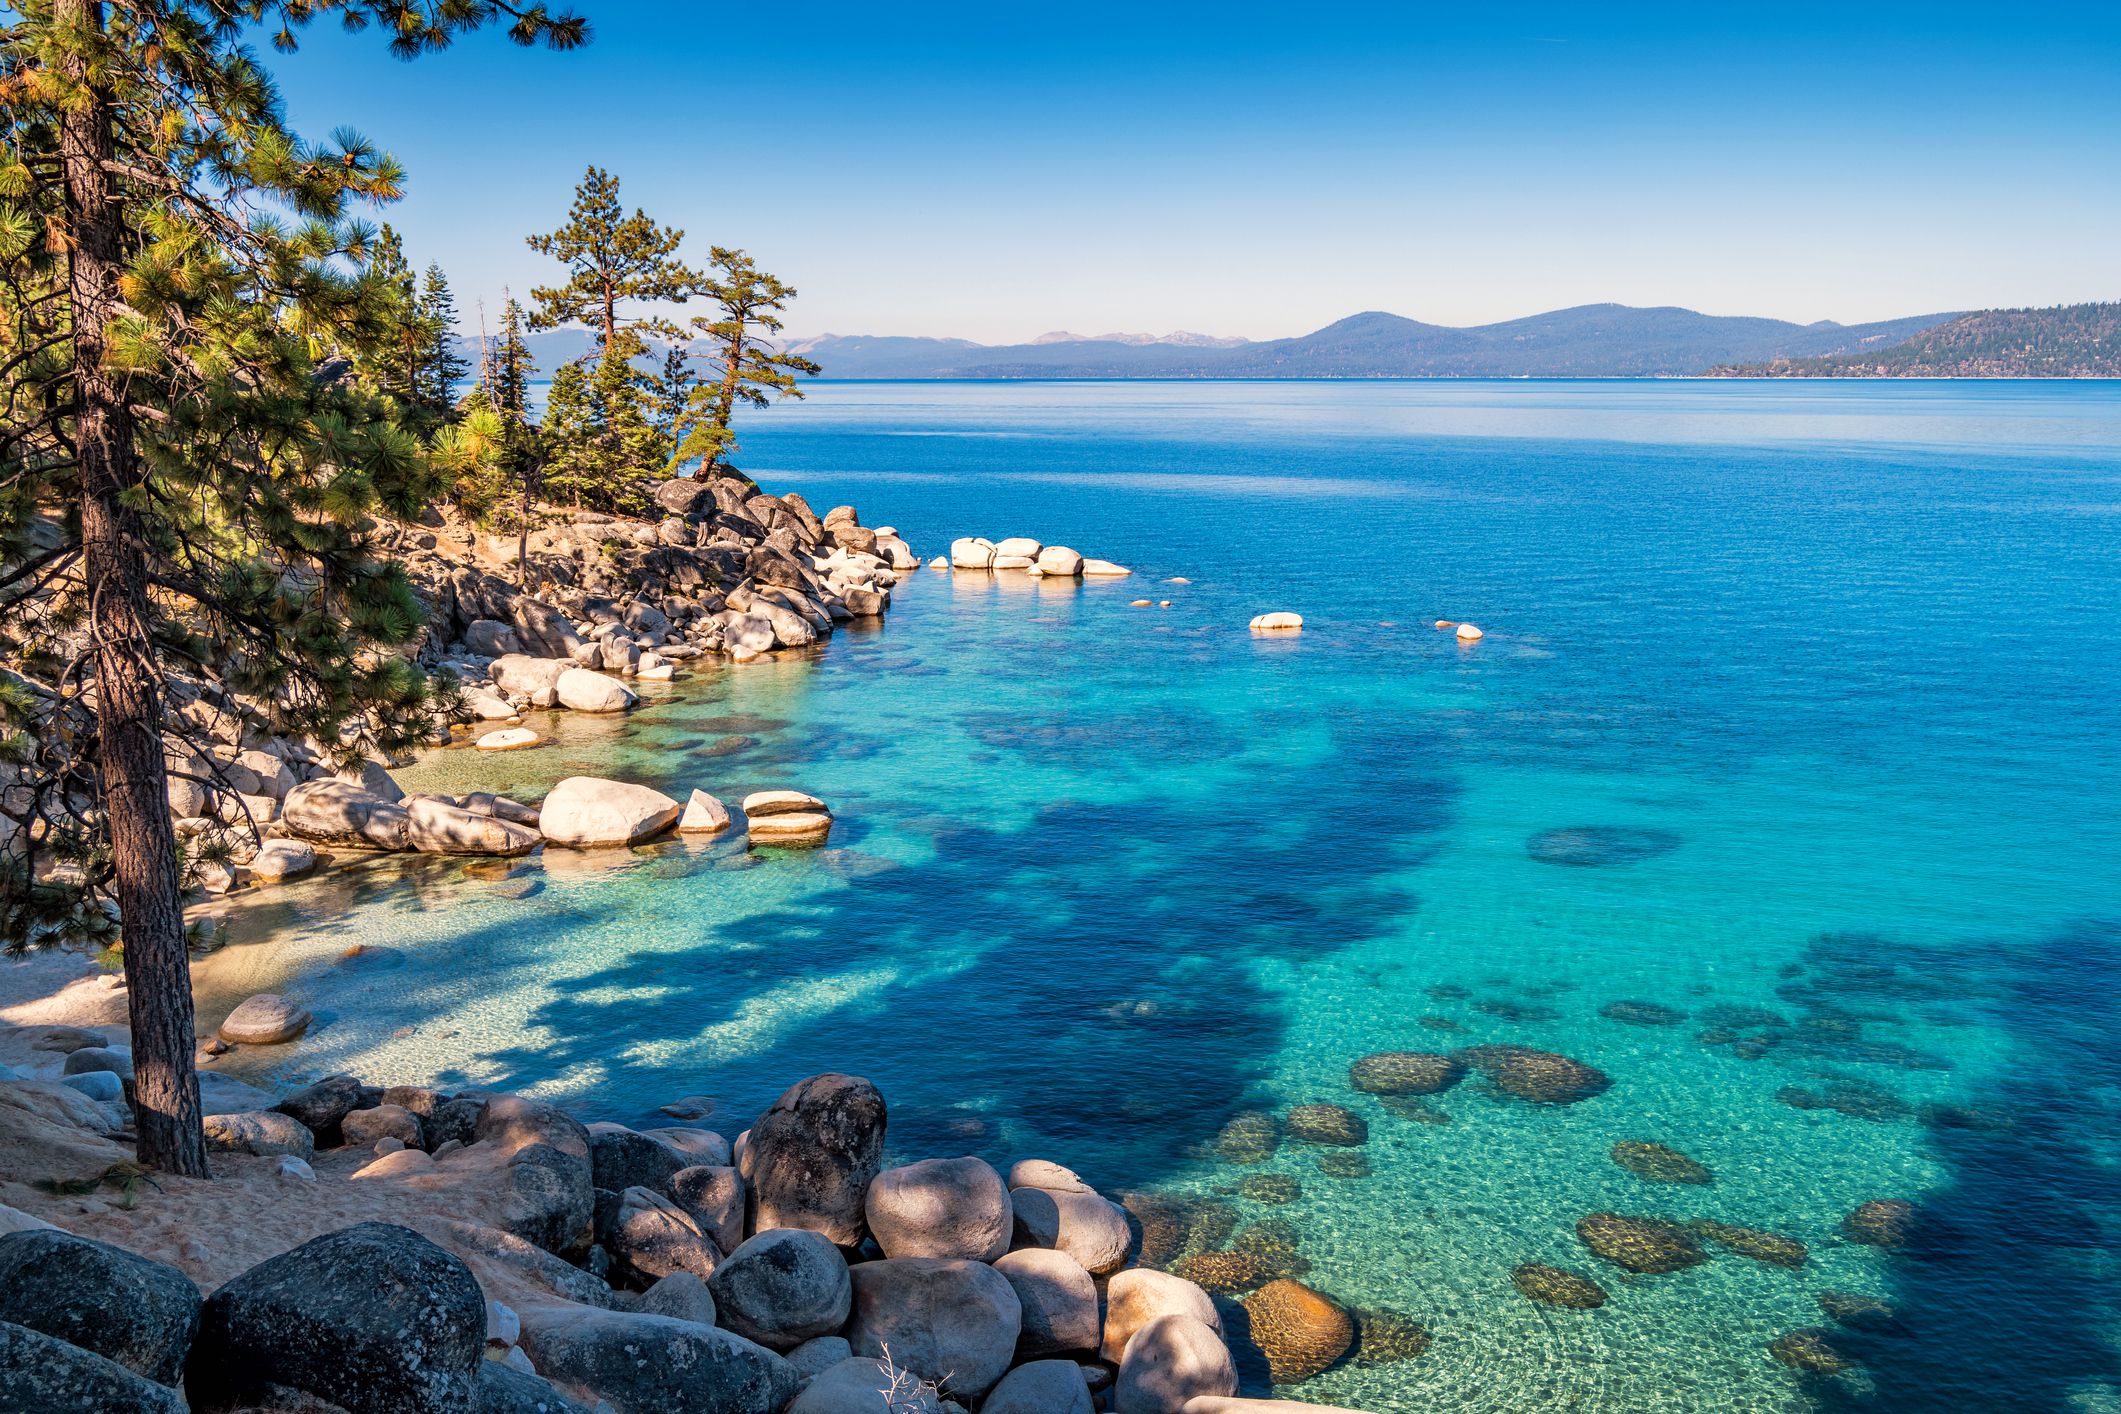 Lake Tahoe's vibrant blue water surrounded by trees.